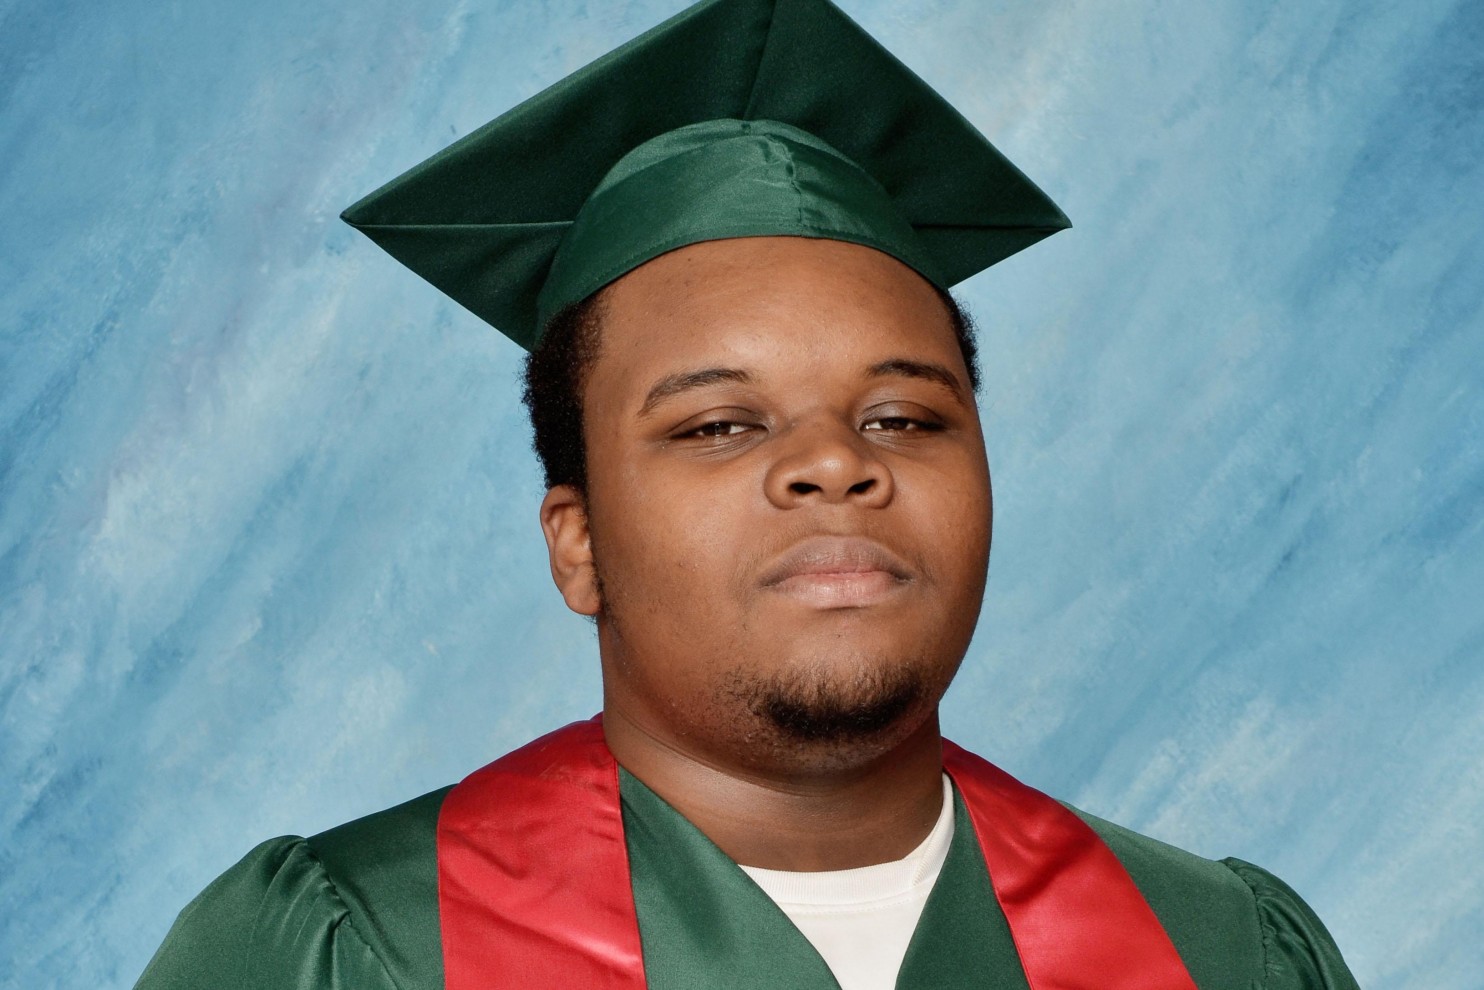 mikebrown